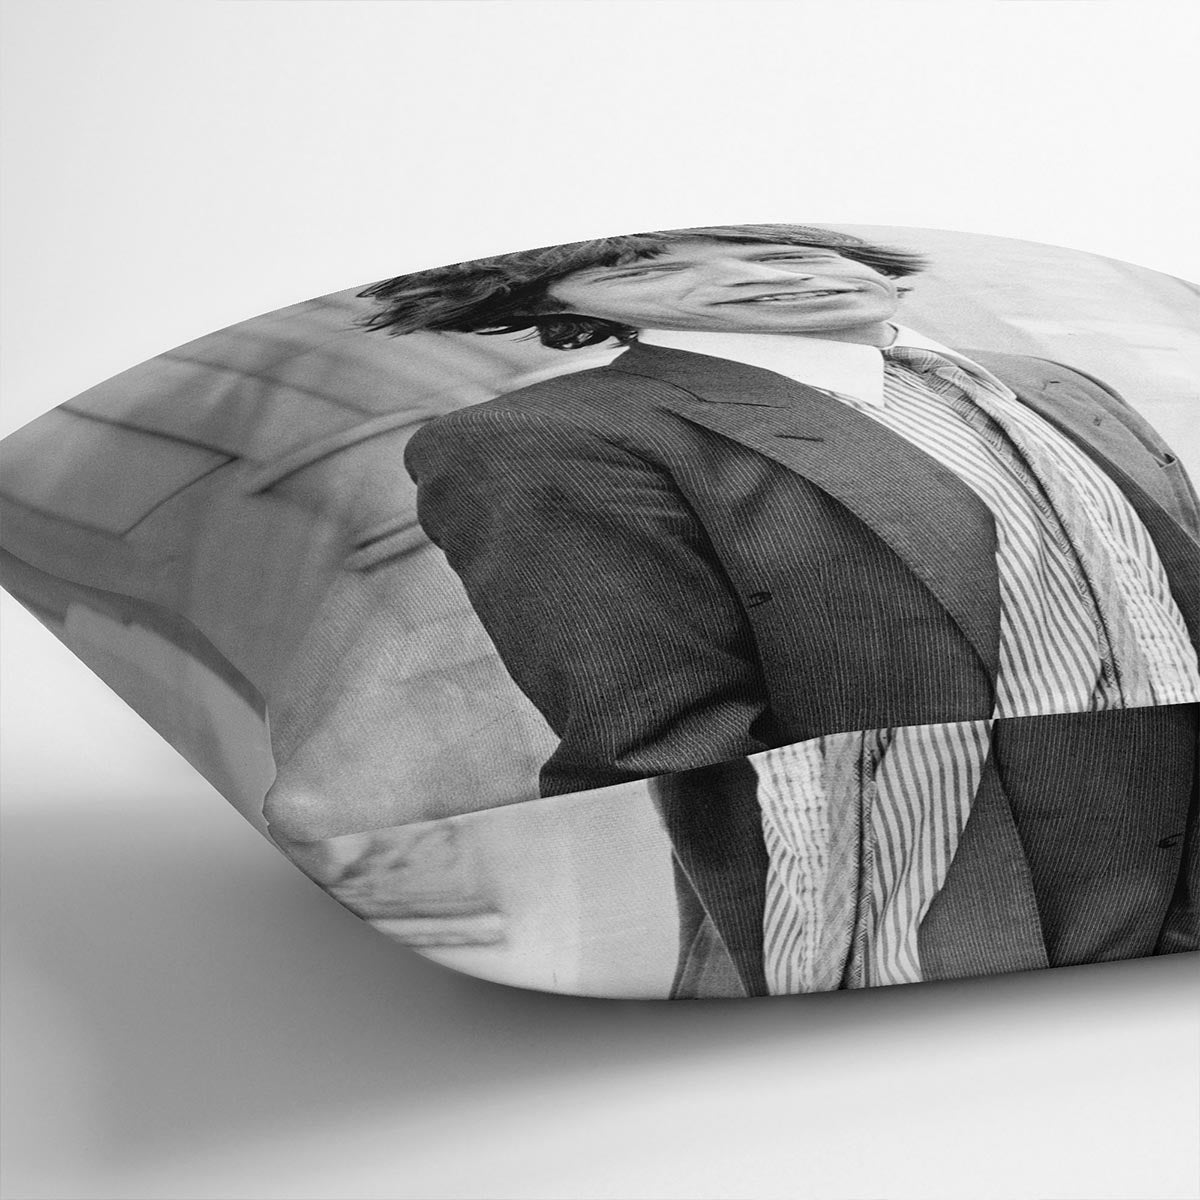 Mick Jagger in a tie Cushion